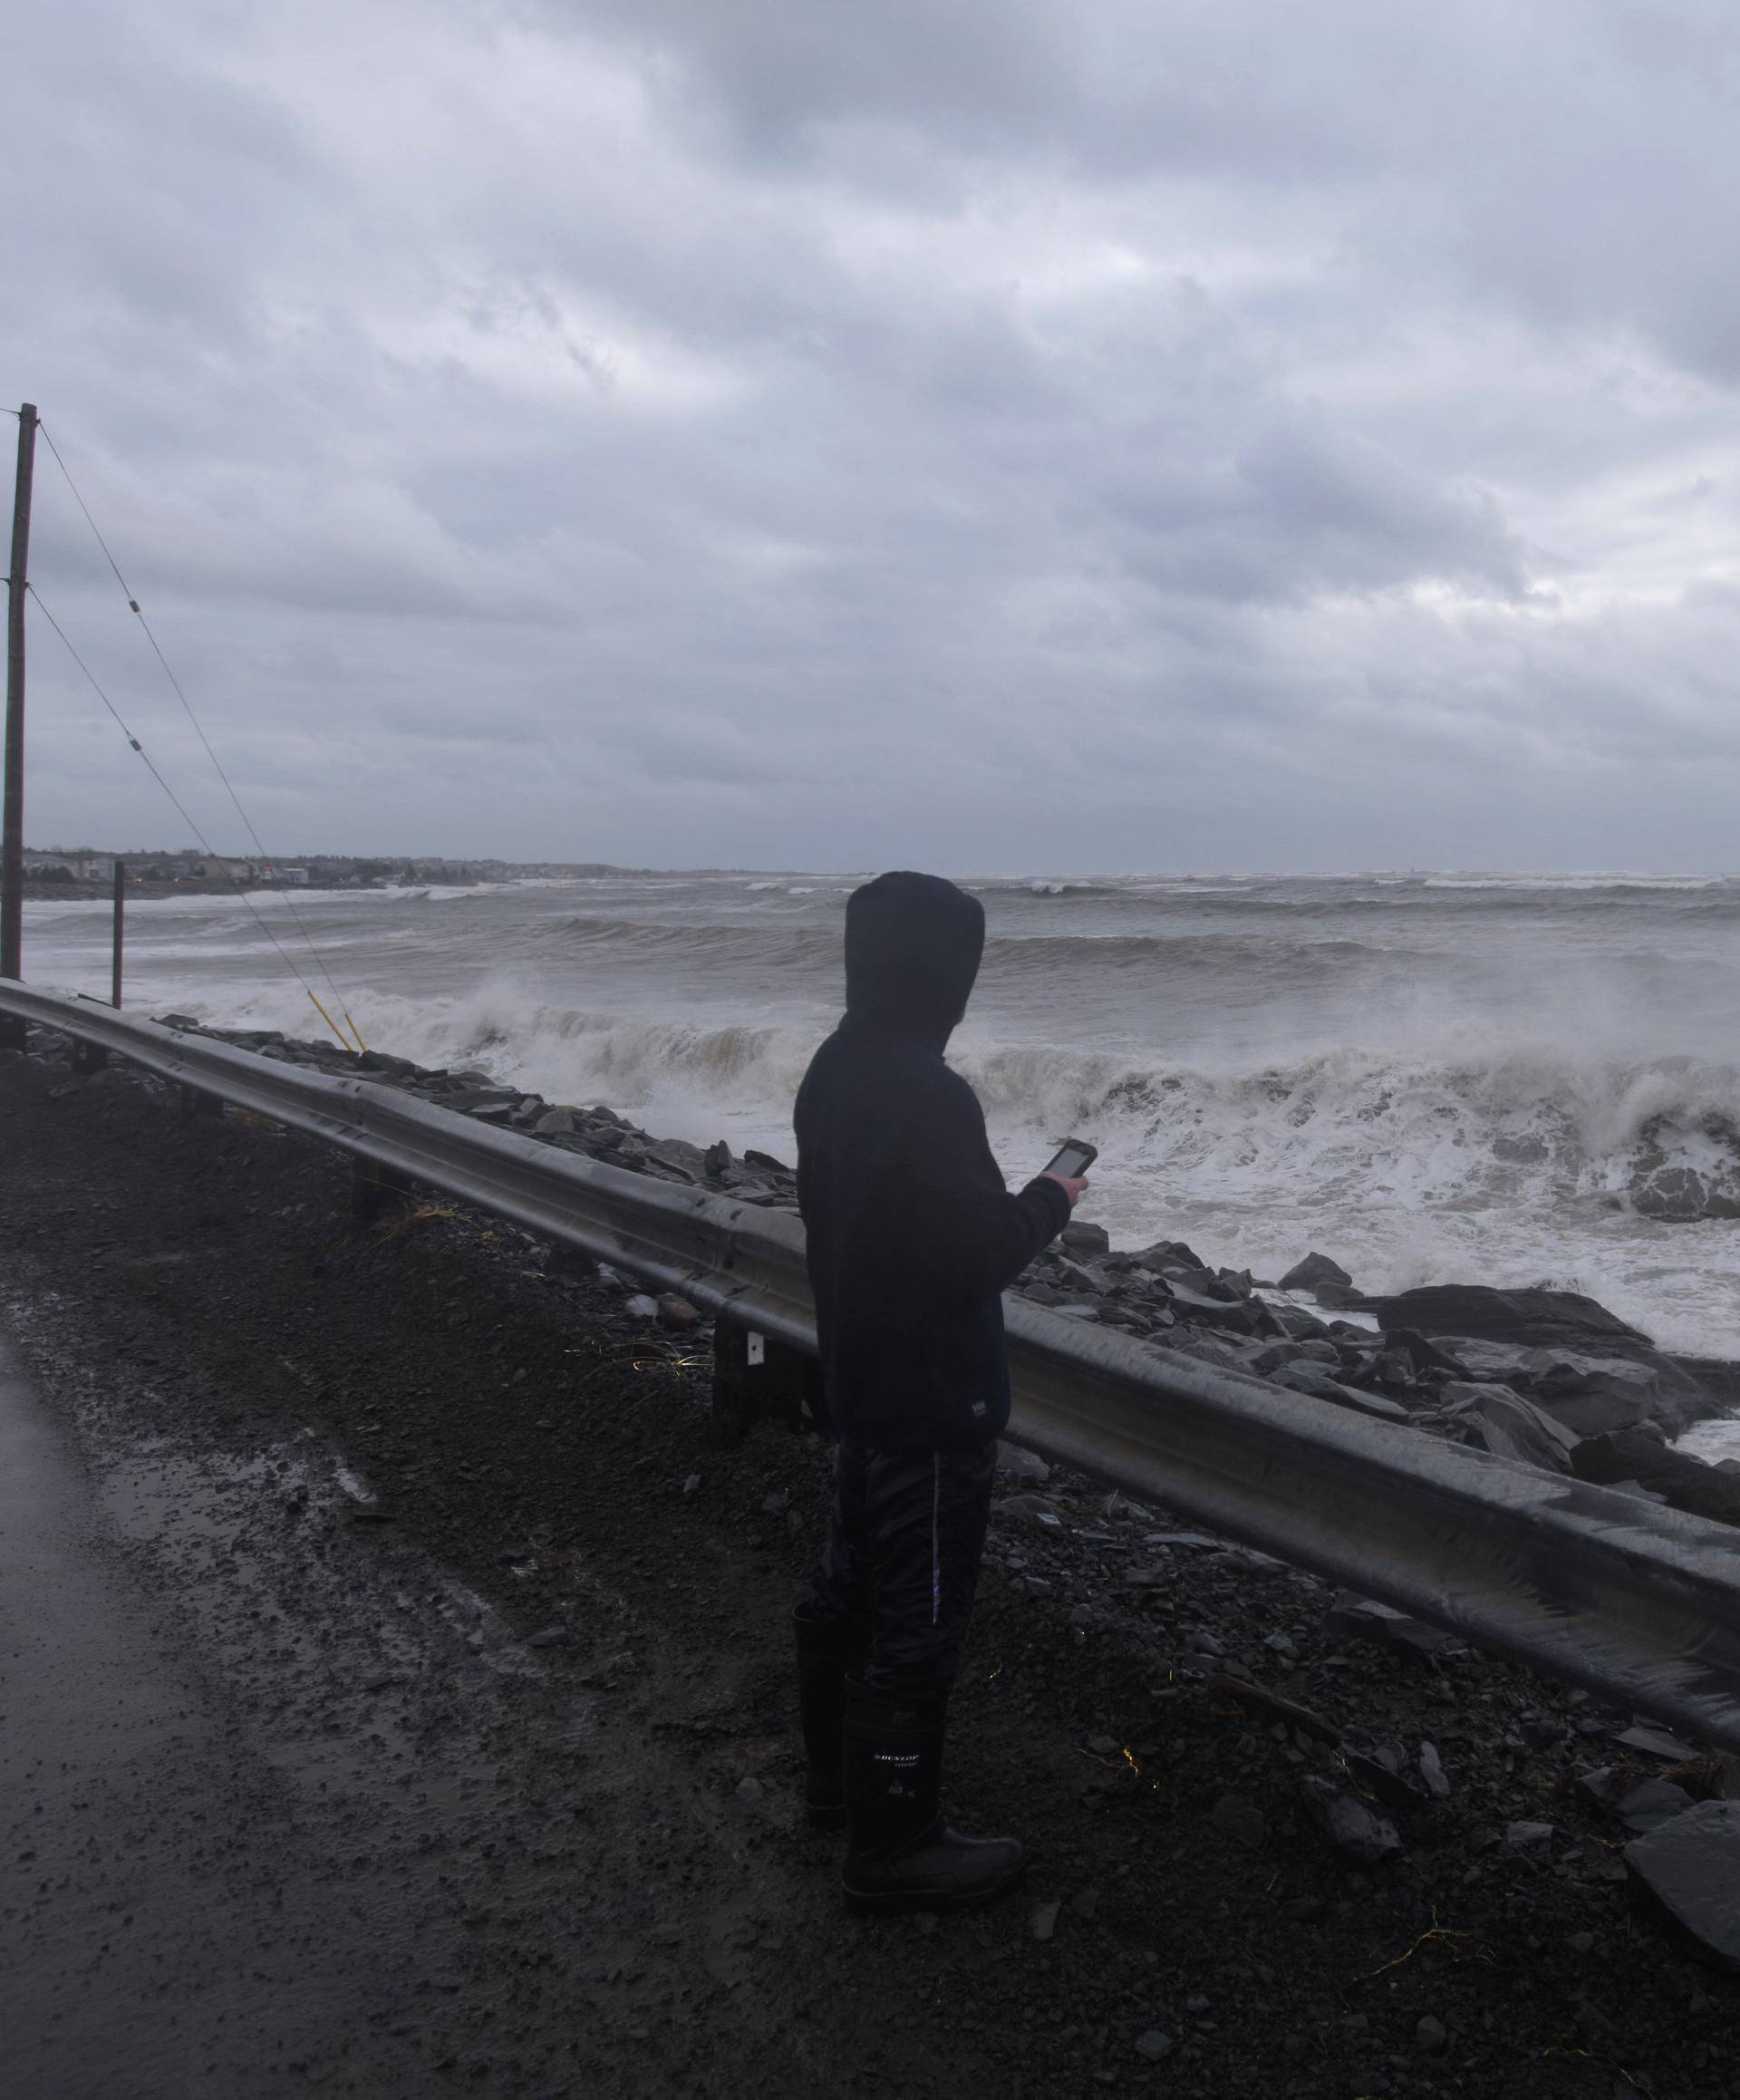 A man films storm surge from the Atlantic Ocean during Storm Grayson in Halifax